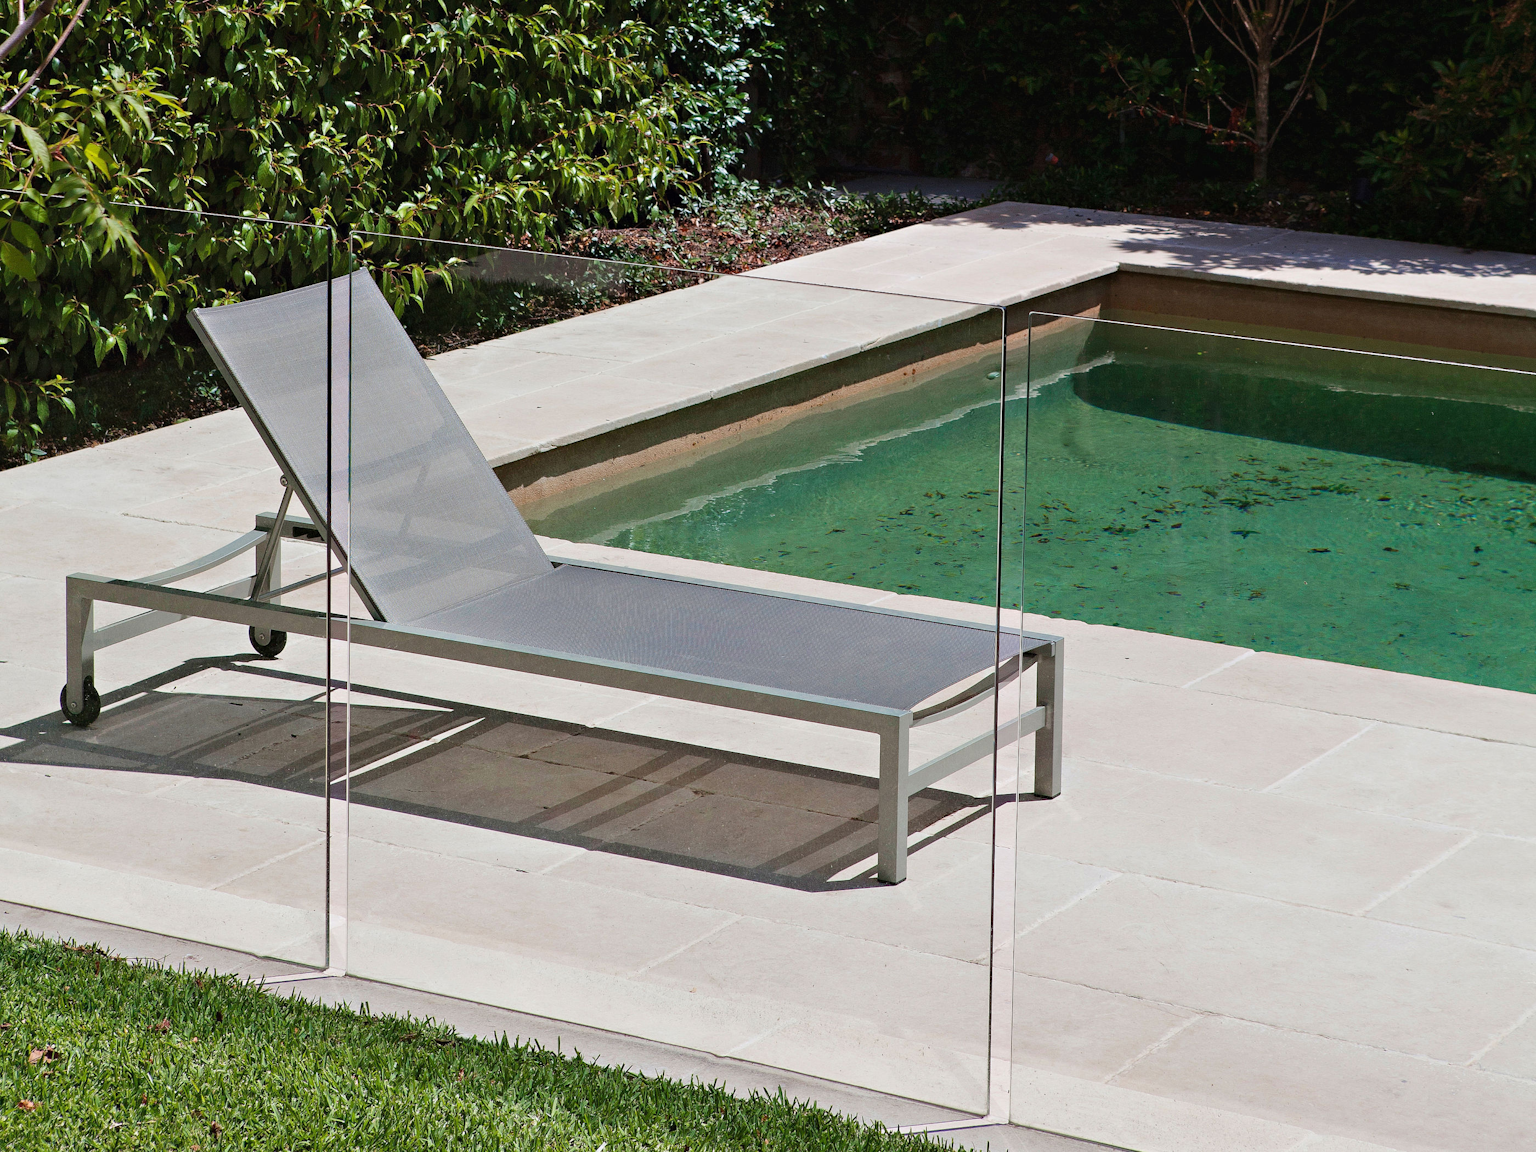 La Roche limestone pavers used as pool surround and coping 